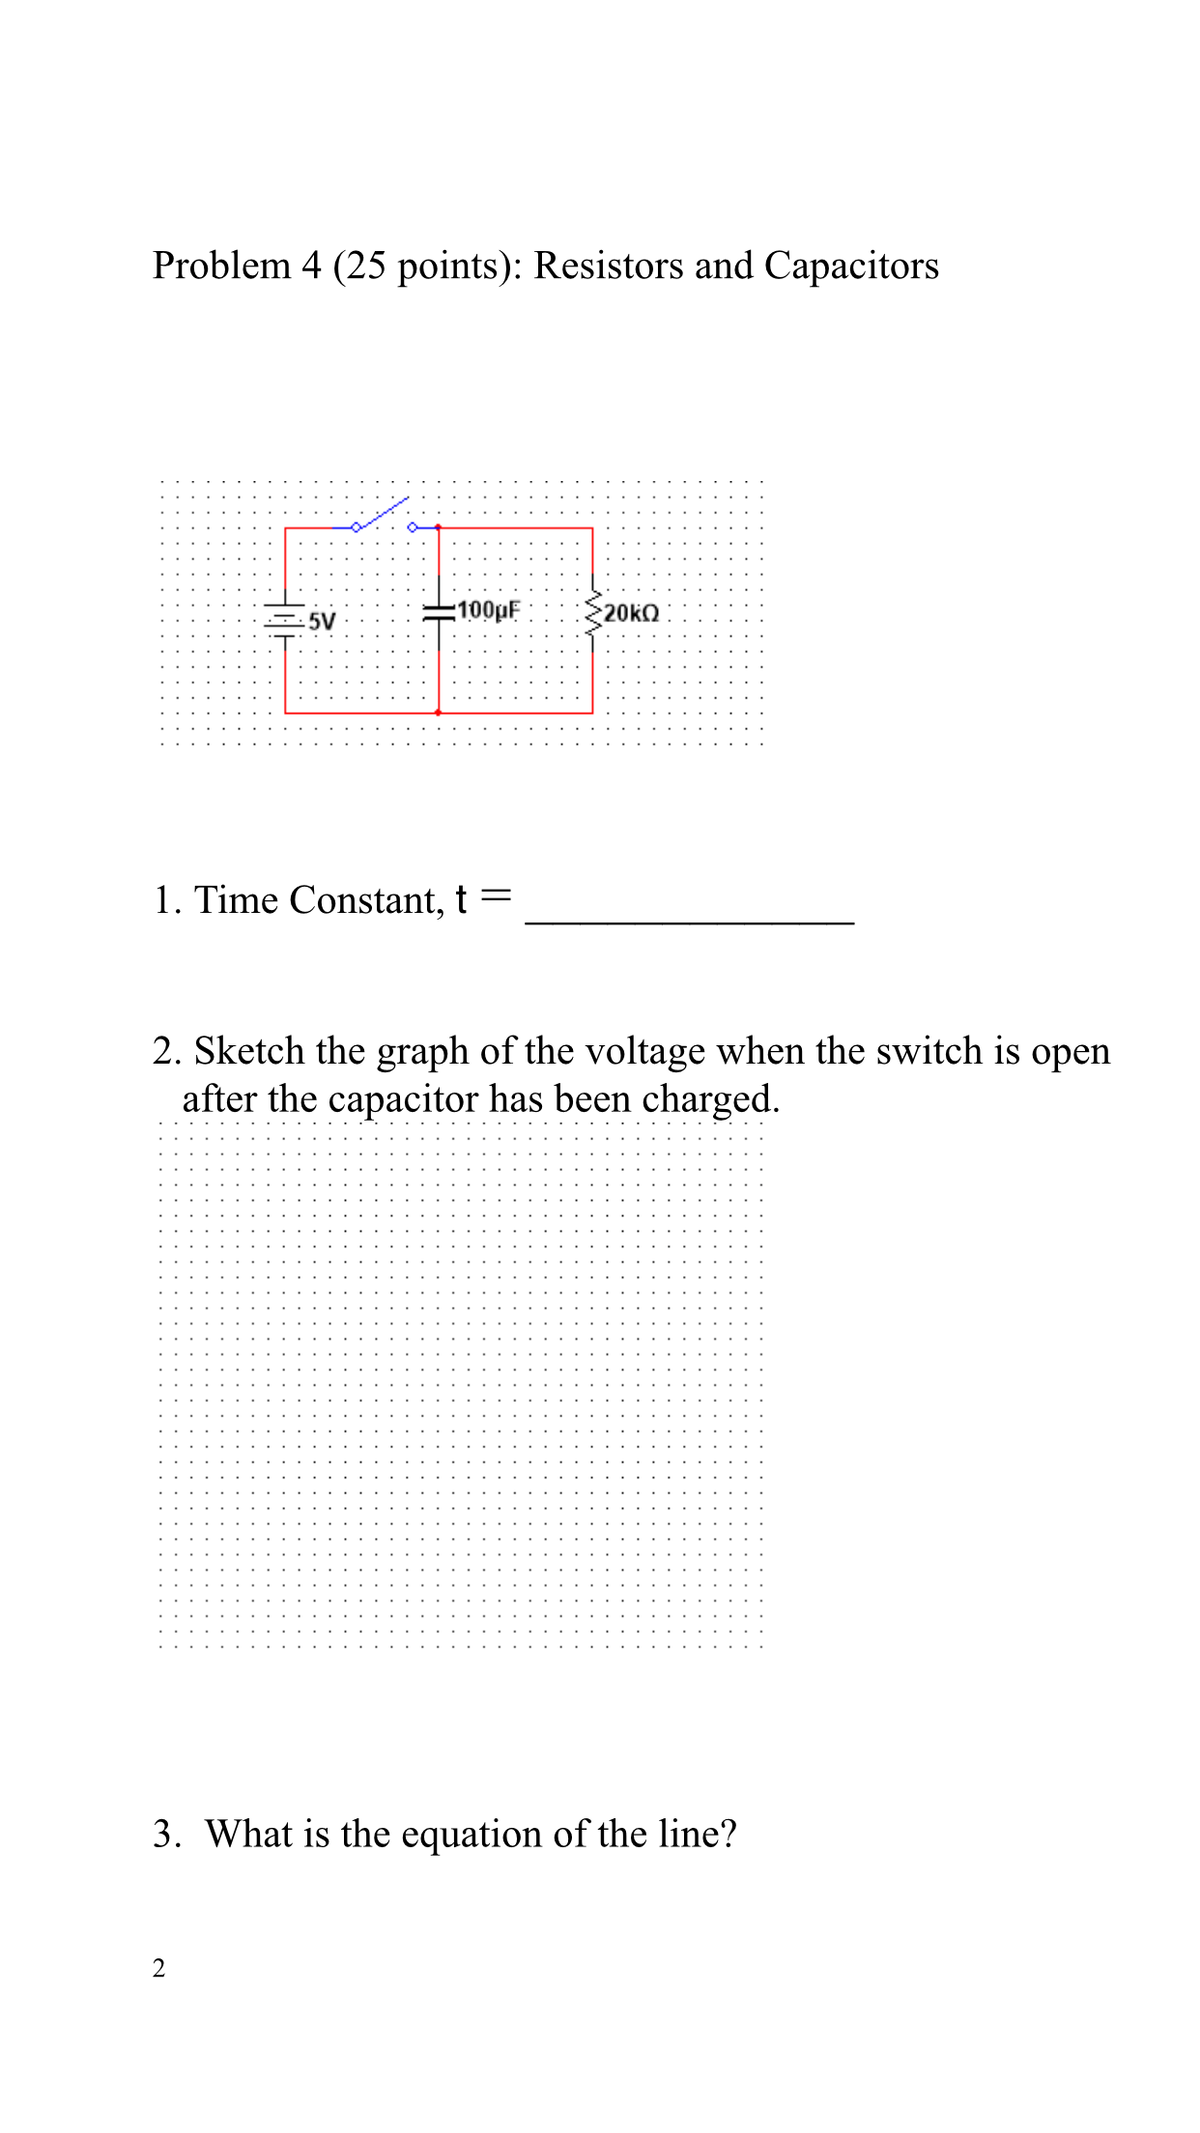 Problem 4 (25 points): Resistors and Capacitors
100pF
20KQ
5V
1. Time Constant, t =
2. Sketch the graph of the voltage when the switch is open
after the capacitor has been charged.
3. What is the equation of the line?
2
